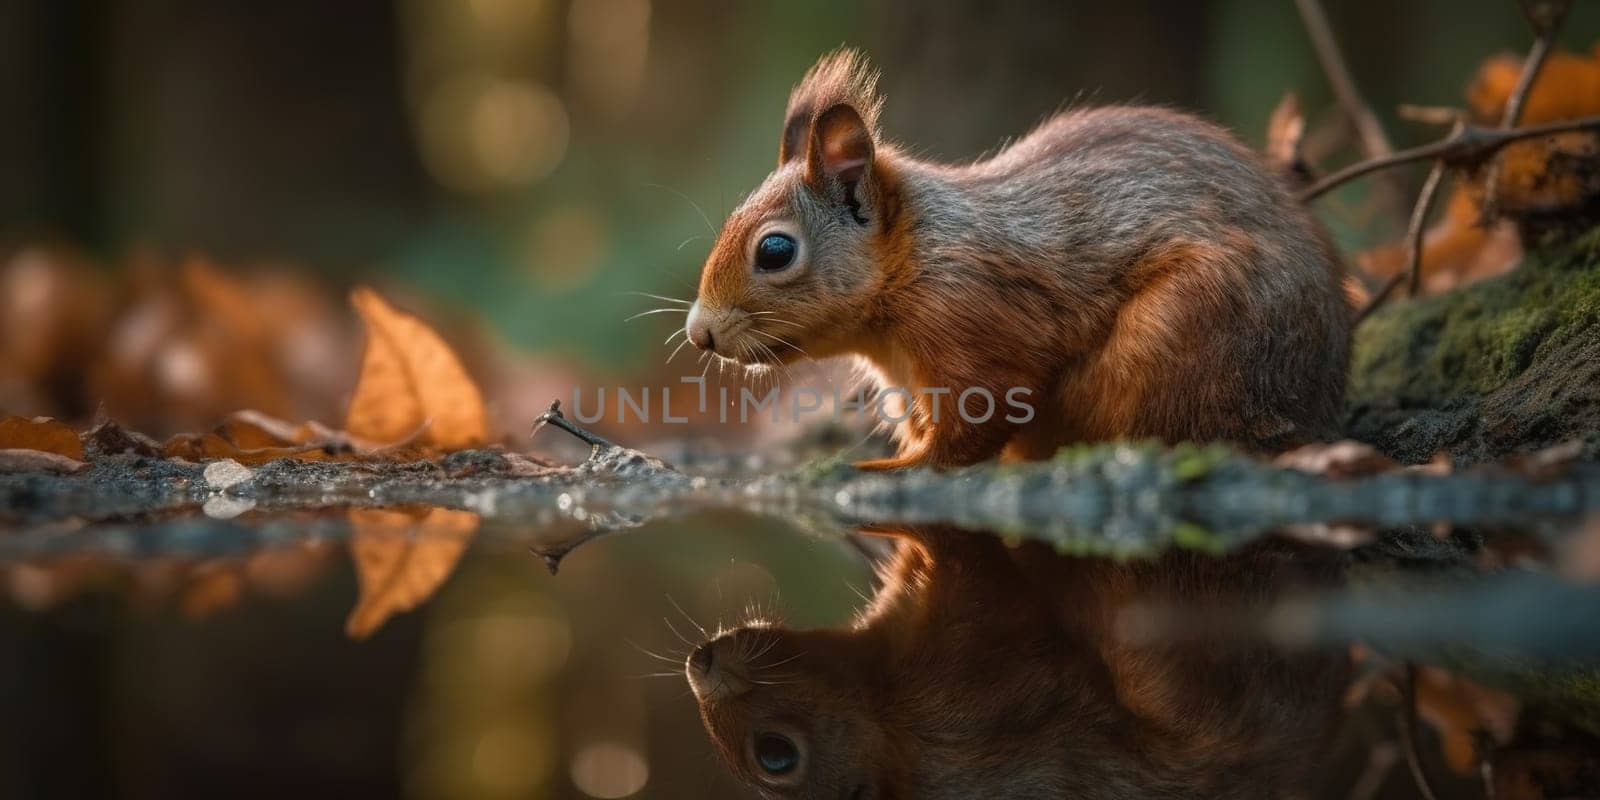 Cute Red Wild Squirrel Looking At Water Reflection In The Puddle In Forest, Animal In Natural Habitat